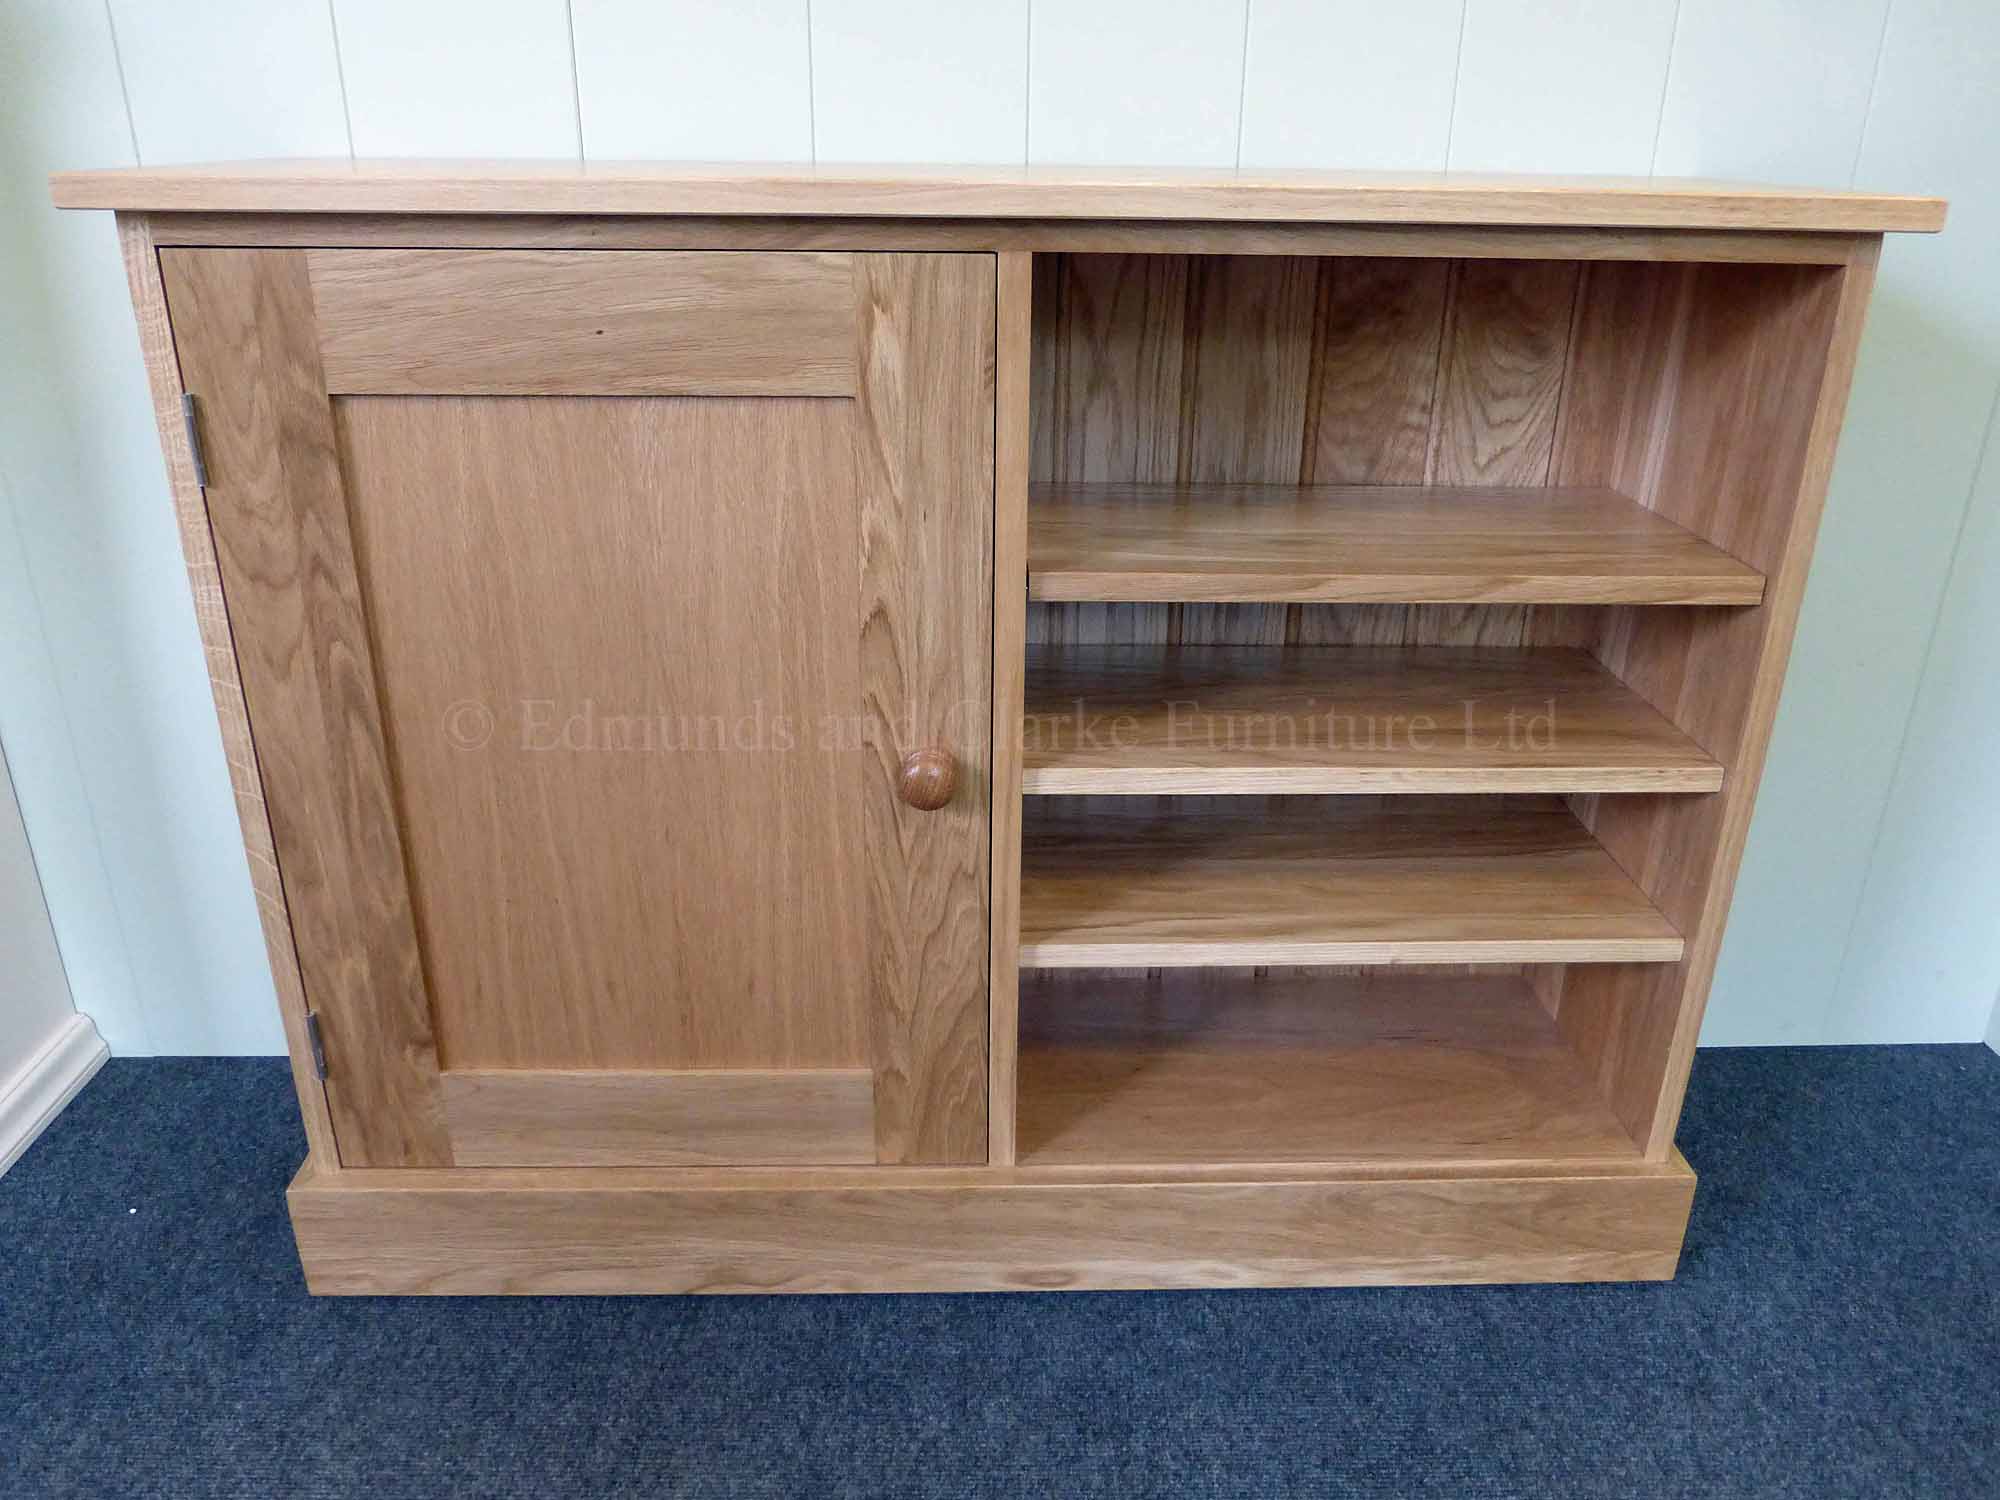 Solid oak multi cupboard paneled door on left with three adjustable shelves on right made all square edge in a shaker design